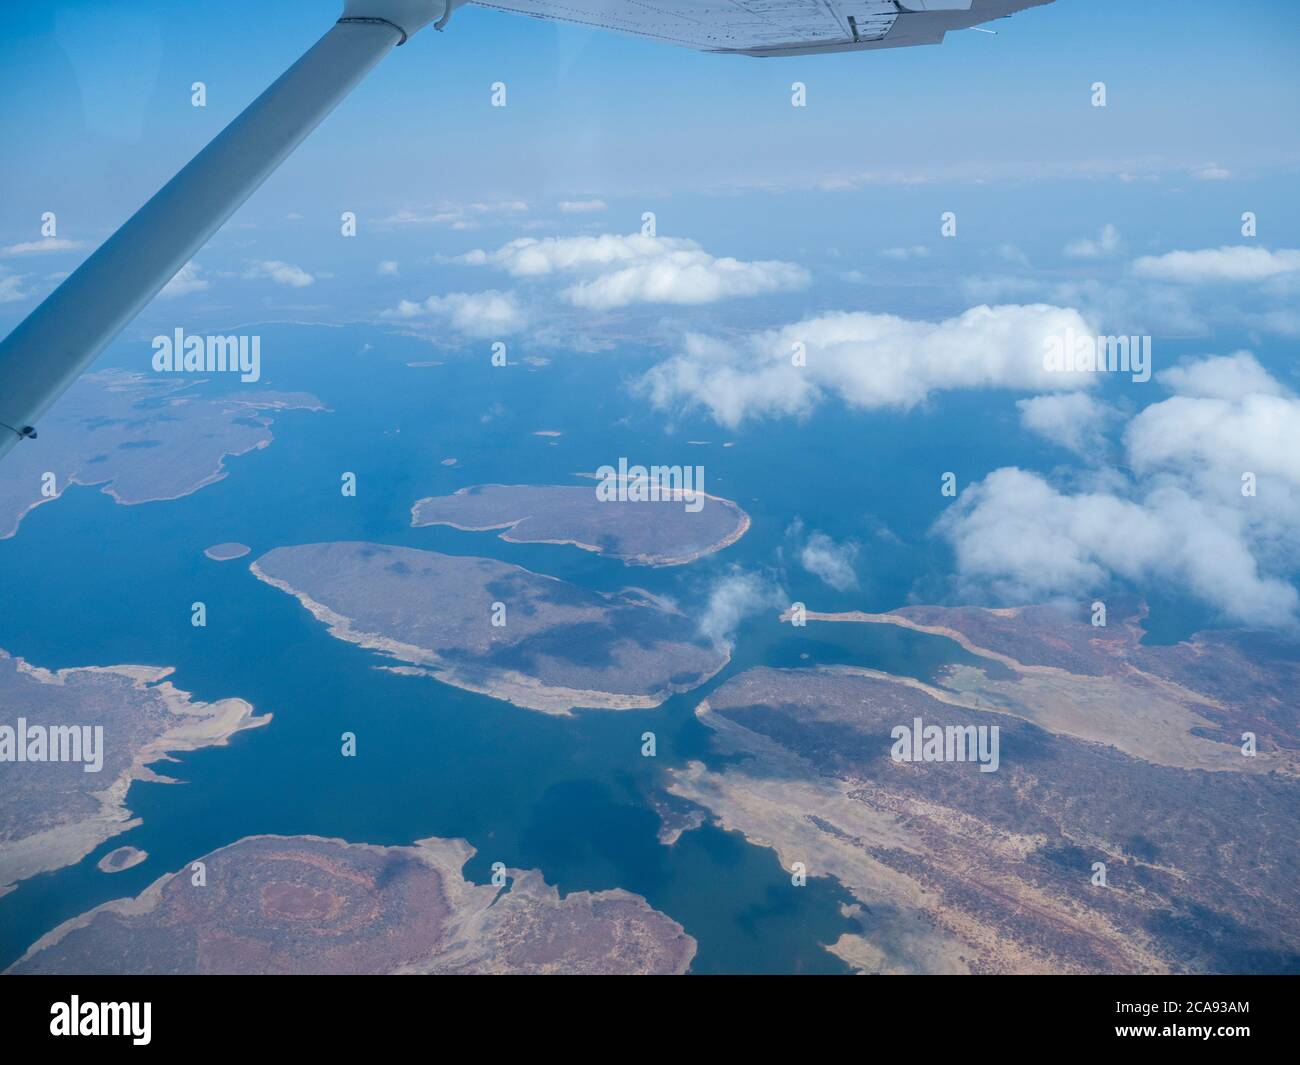 Aerial view of Lake Kariba, the world's largest man-made lake and reservoir by volume, Zimbabwe, Africa Stock Photo